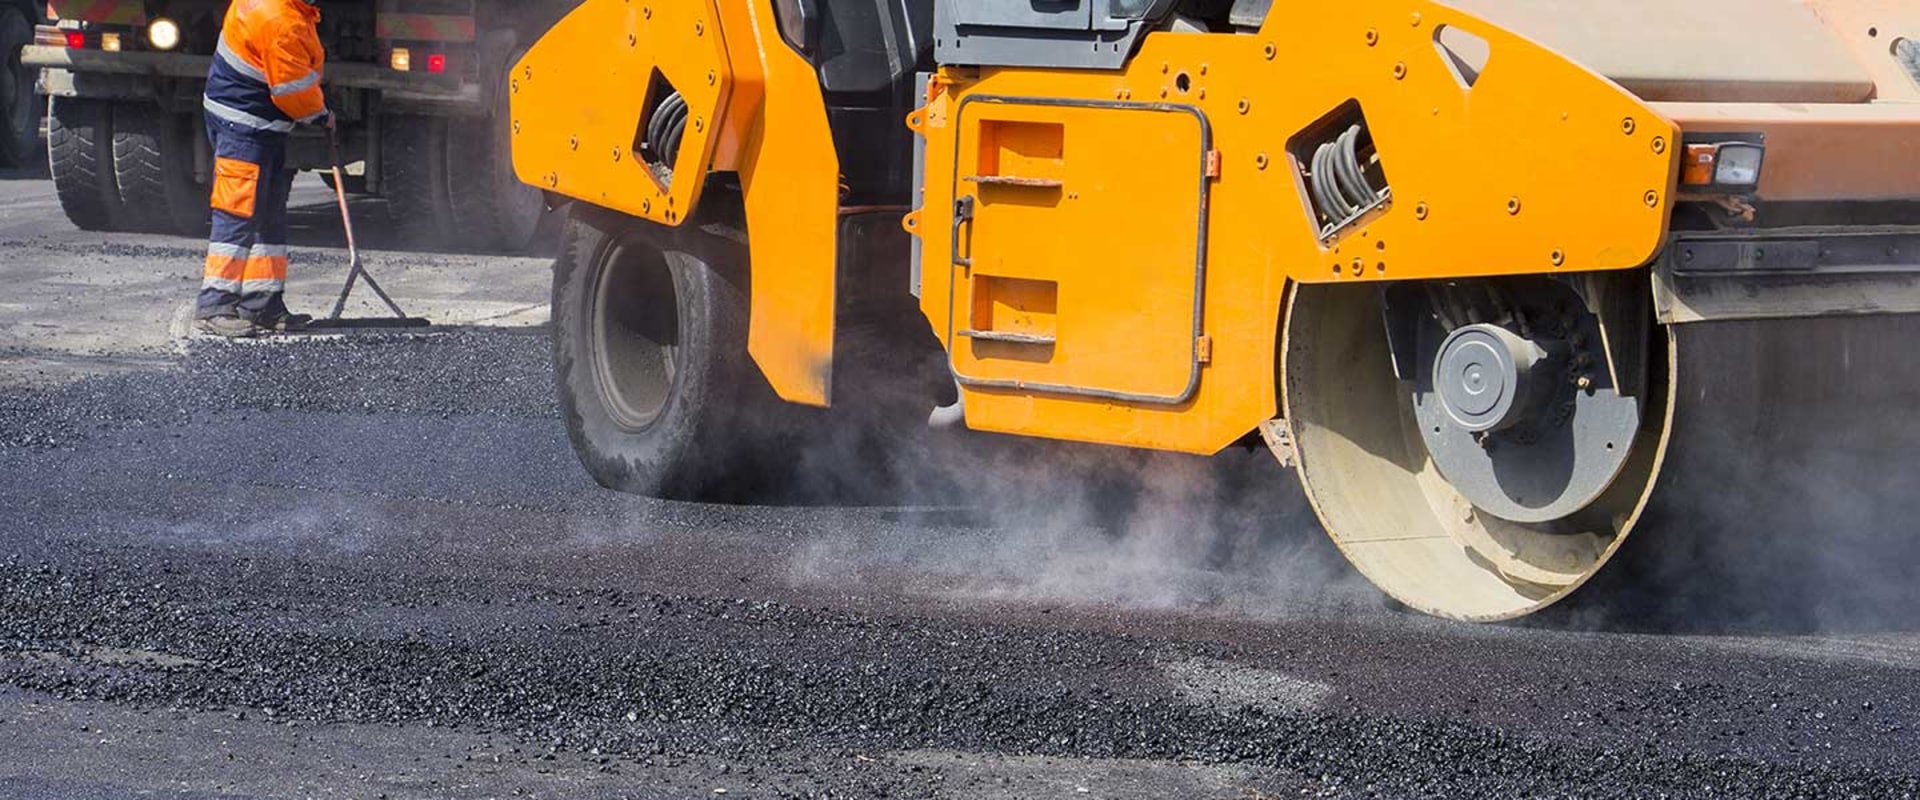 How to Ensure an Anti-Vibration Solution is Suitable for Heavy Machinery